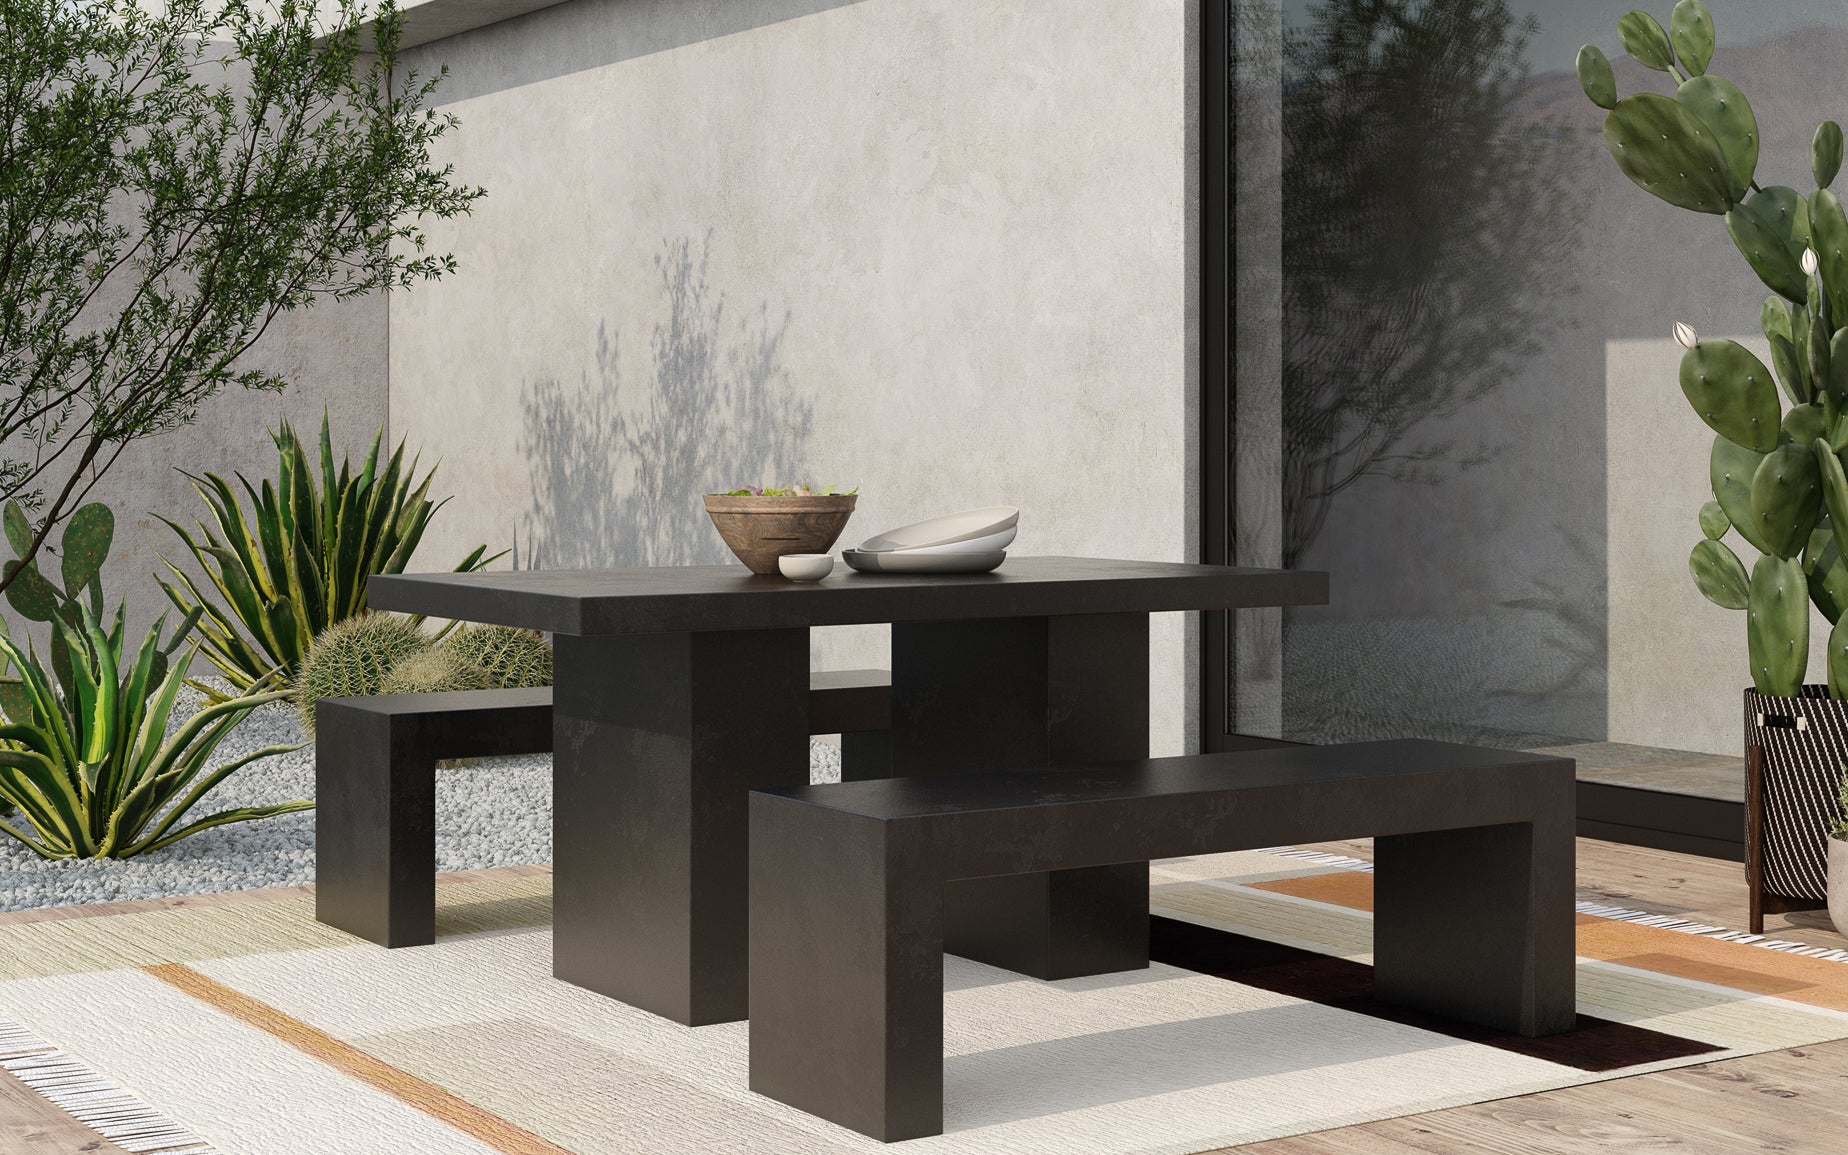 Elevating Outdoor Dining: The Premium Blend of Style and Durability with Dala Decor